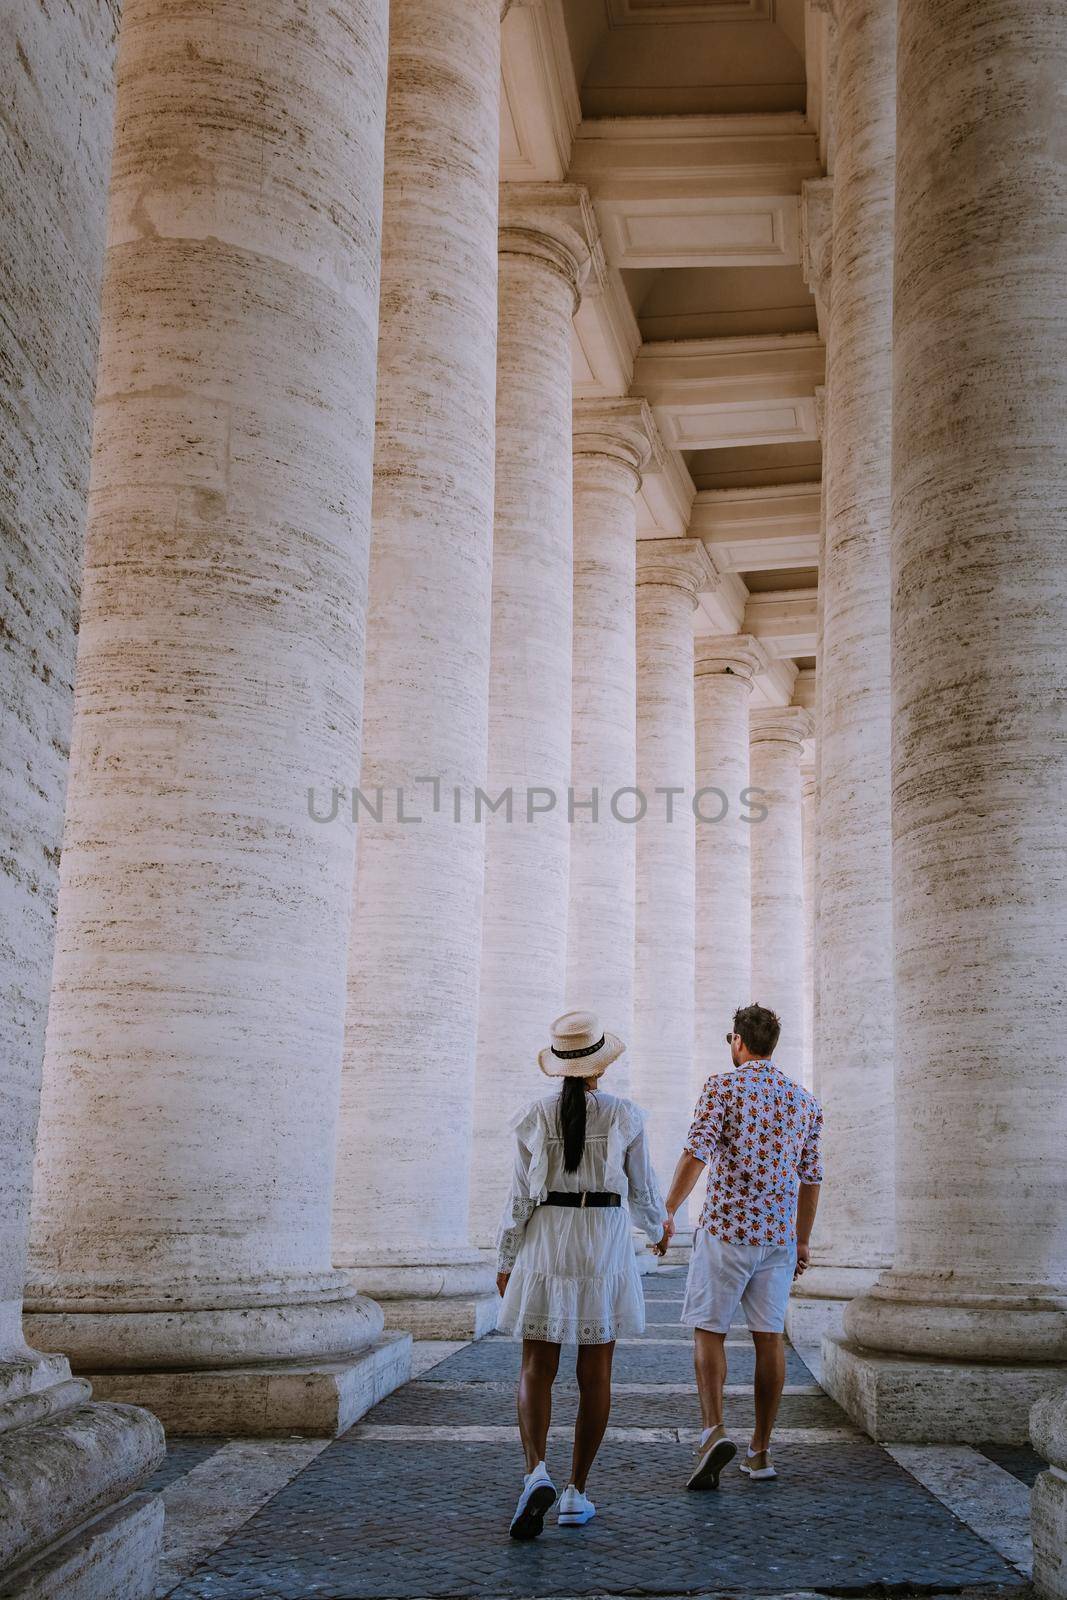 St. Peter's Basilica in the morning from Via della Conciliazione in Rome. Vatican City Rome Italy. Rome architecture and landmark. St. Peter's cathedral in Rome. Couple on city trip